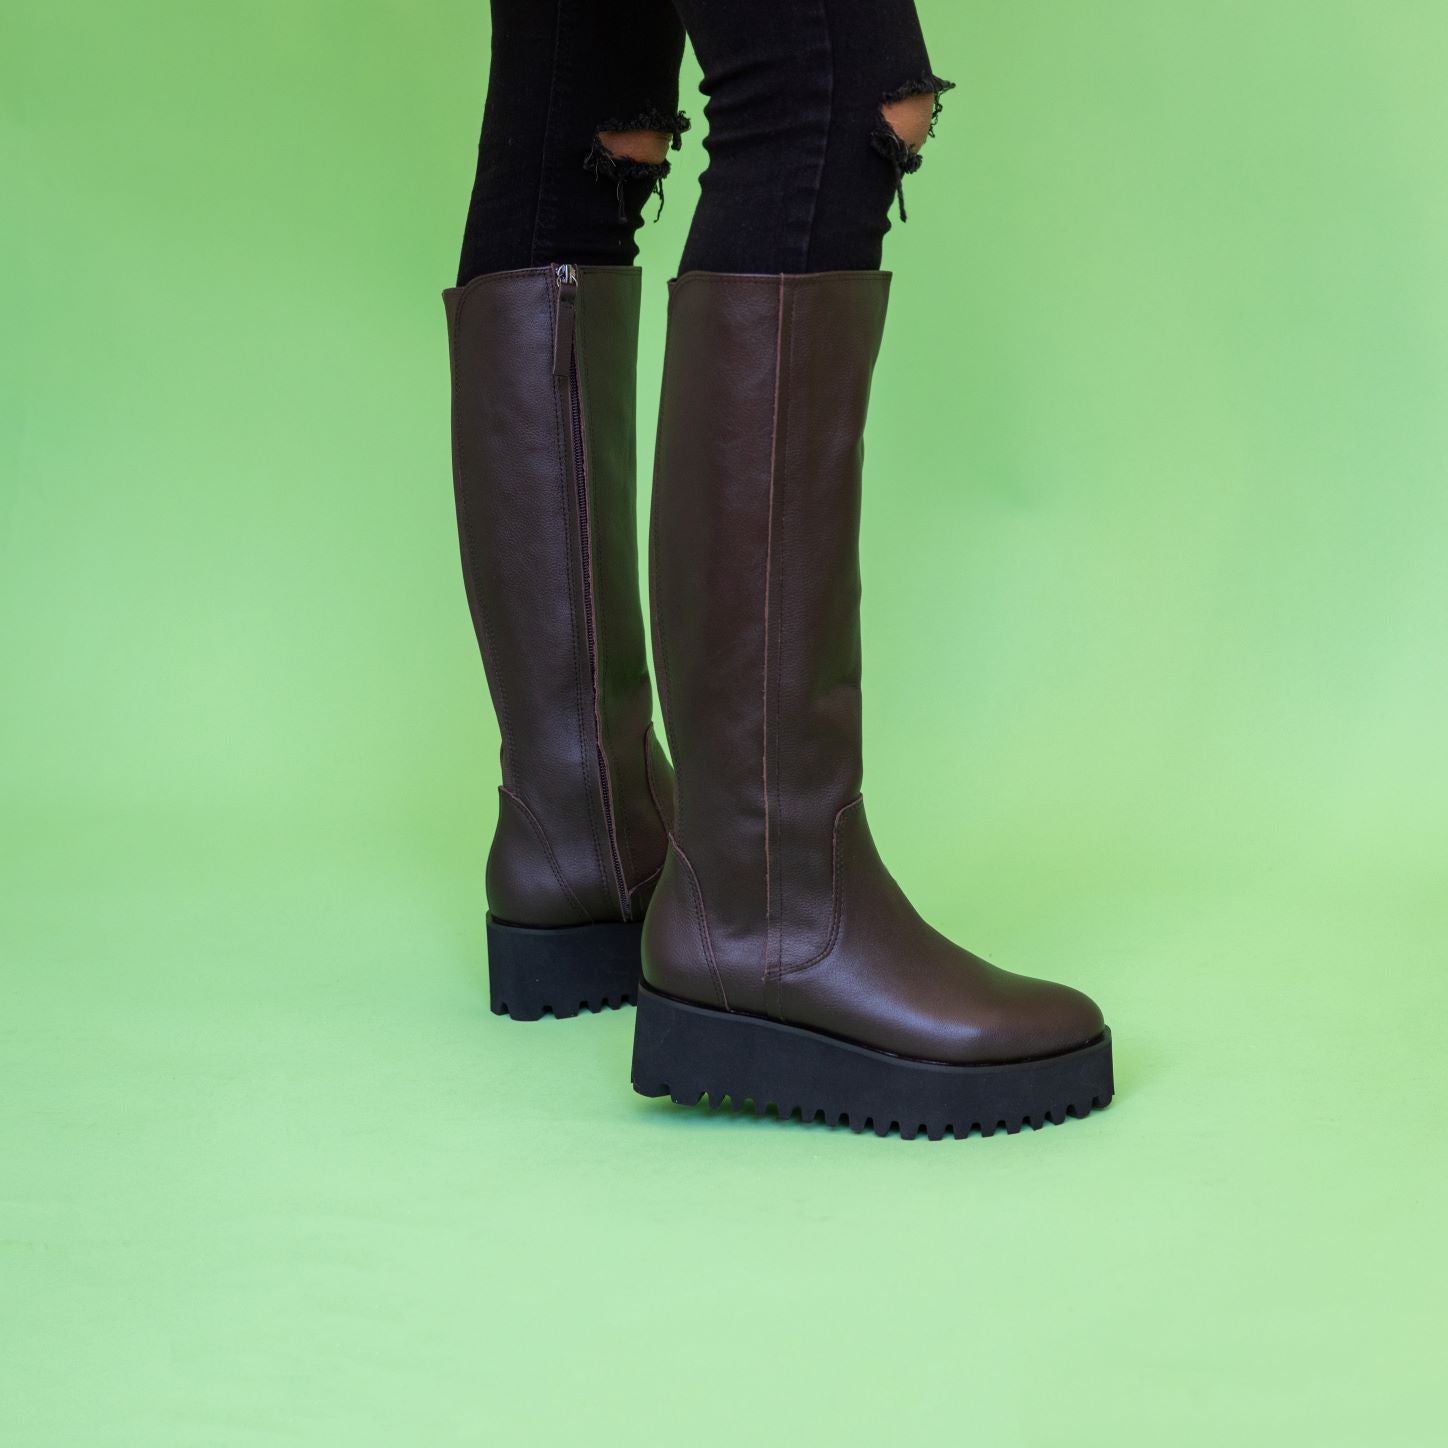 STRETCH Knee High Brown Boots | Tall brown leather boots